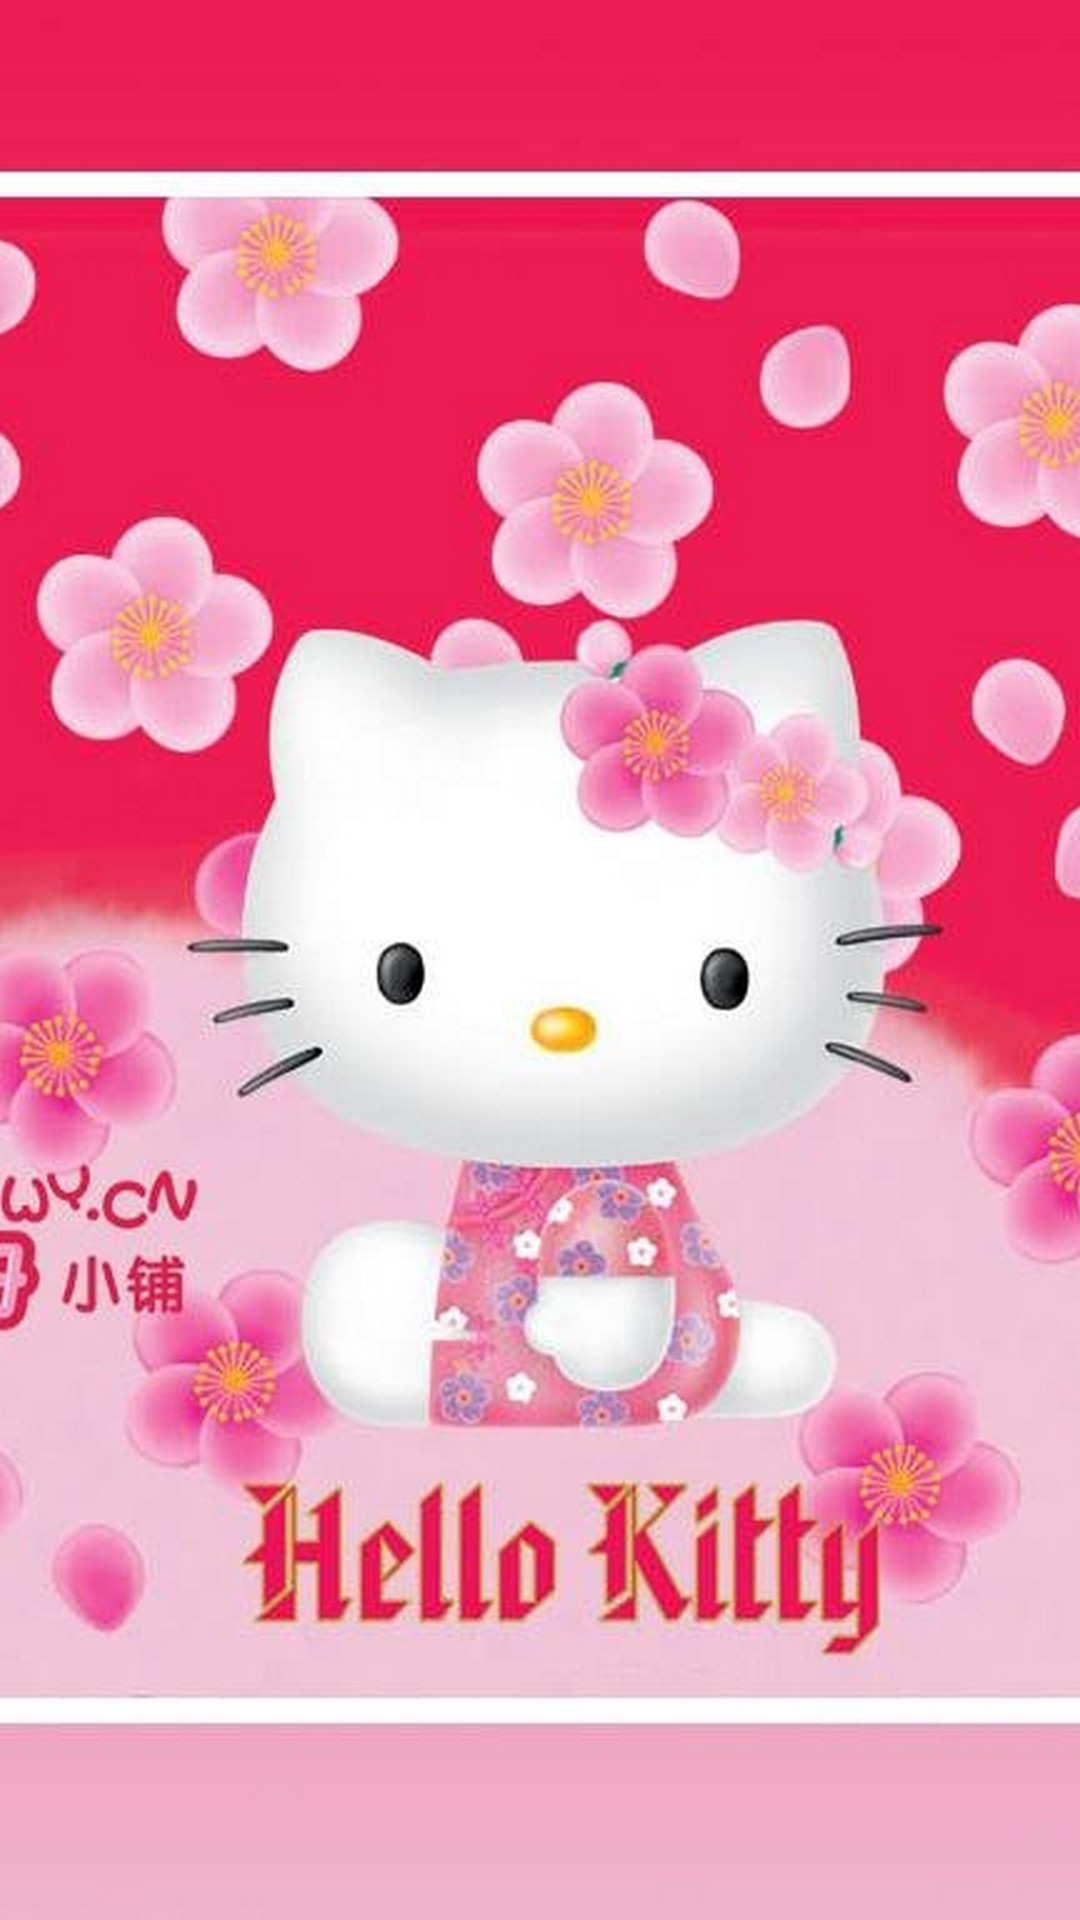 Hello Kitty Characters Wallpaper iPhone with resolution 1080X1920 pixel. You can make this wallpaper for your iPhone 5, 6, 7, 8, X backgrounds, Mobile Screensaver, or iPad Lock Screen